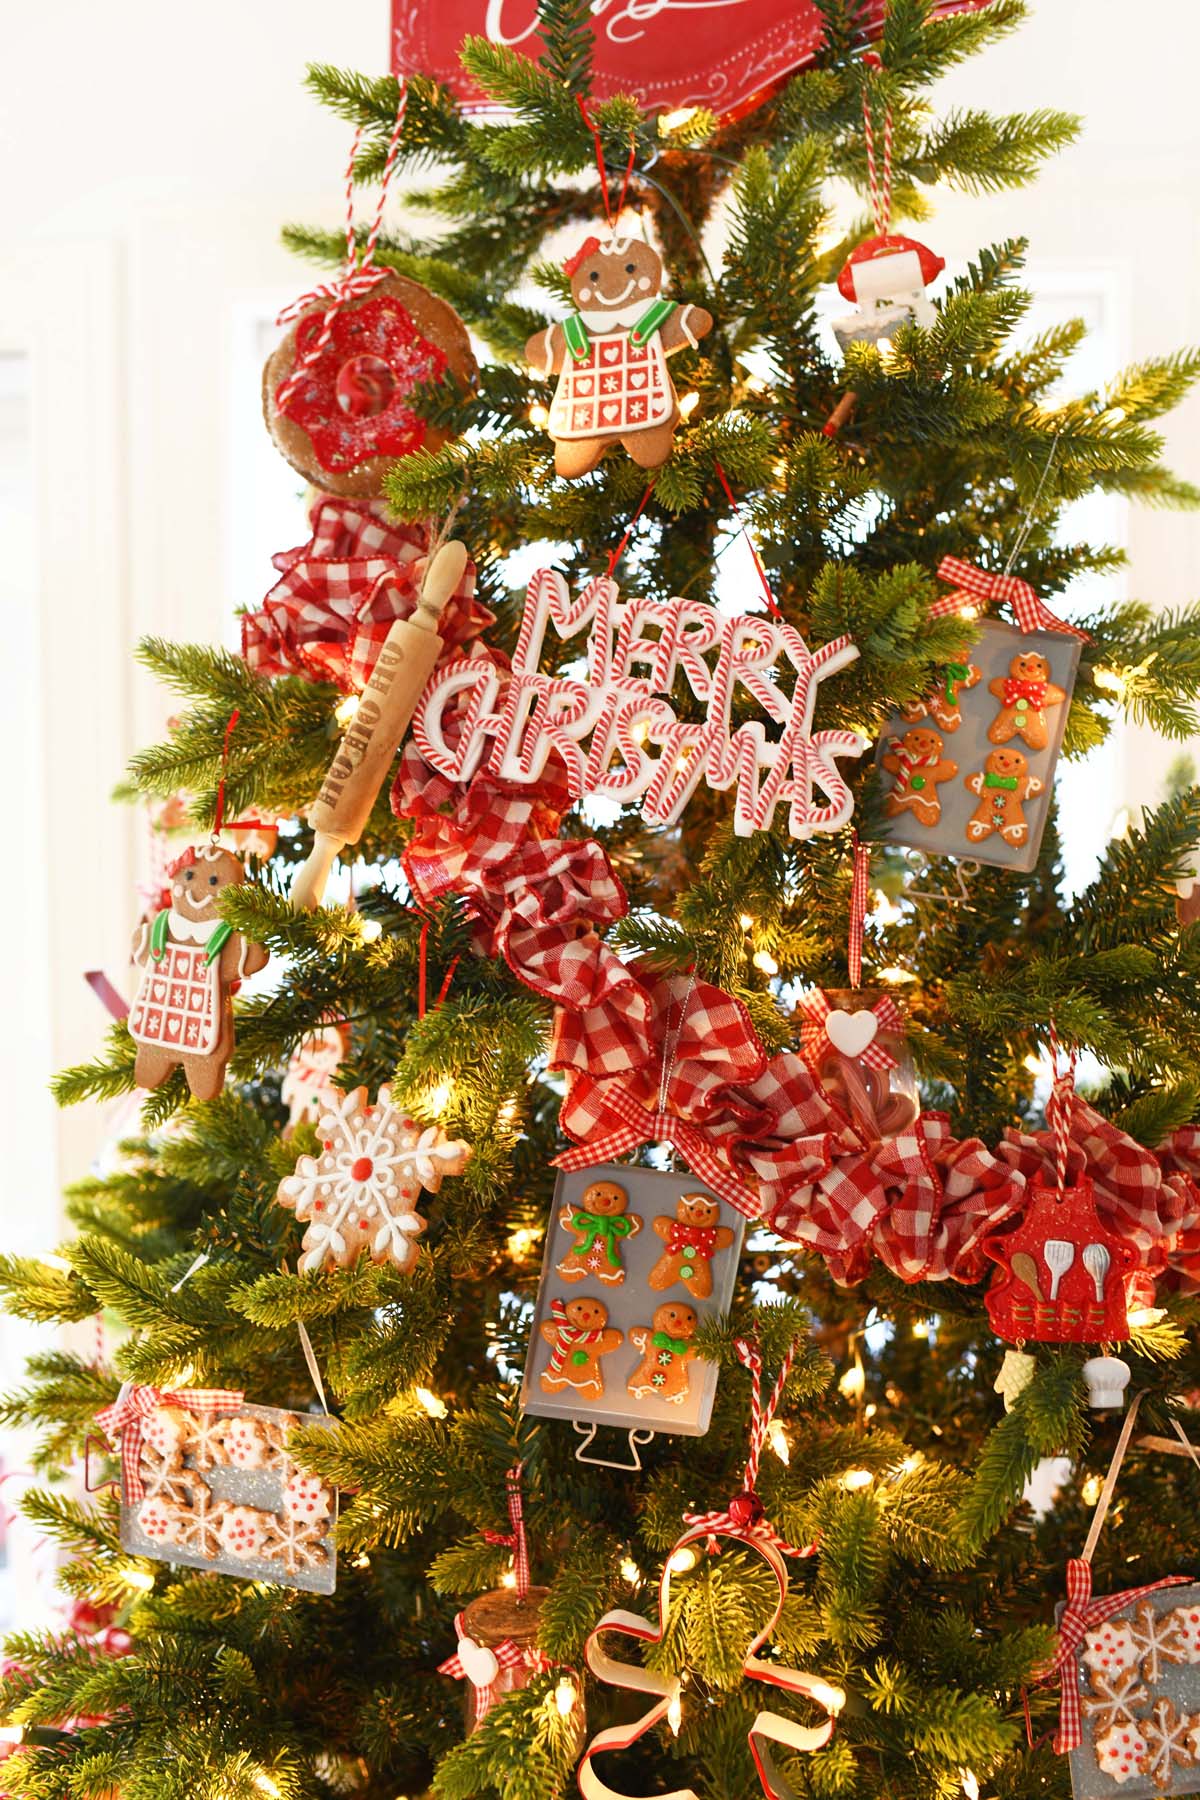 Red Gingham Tree tree garland on a baking Christmas tree.